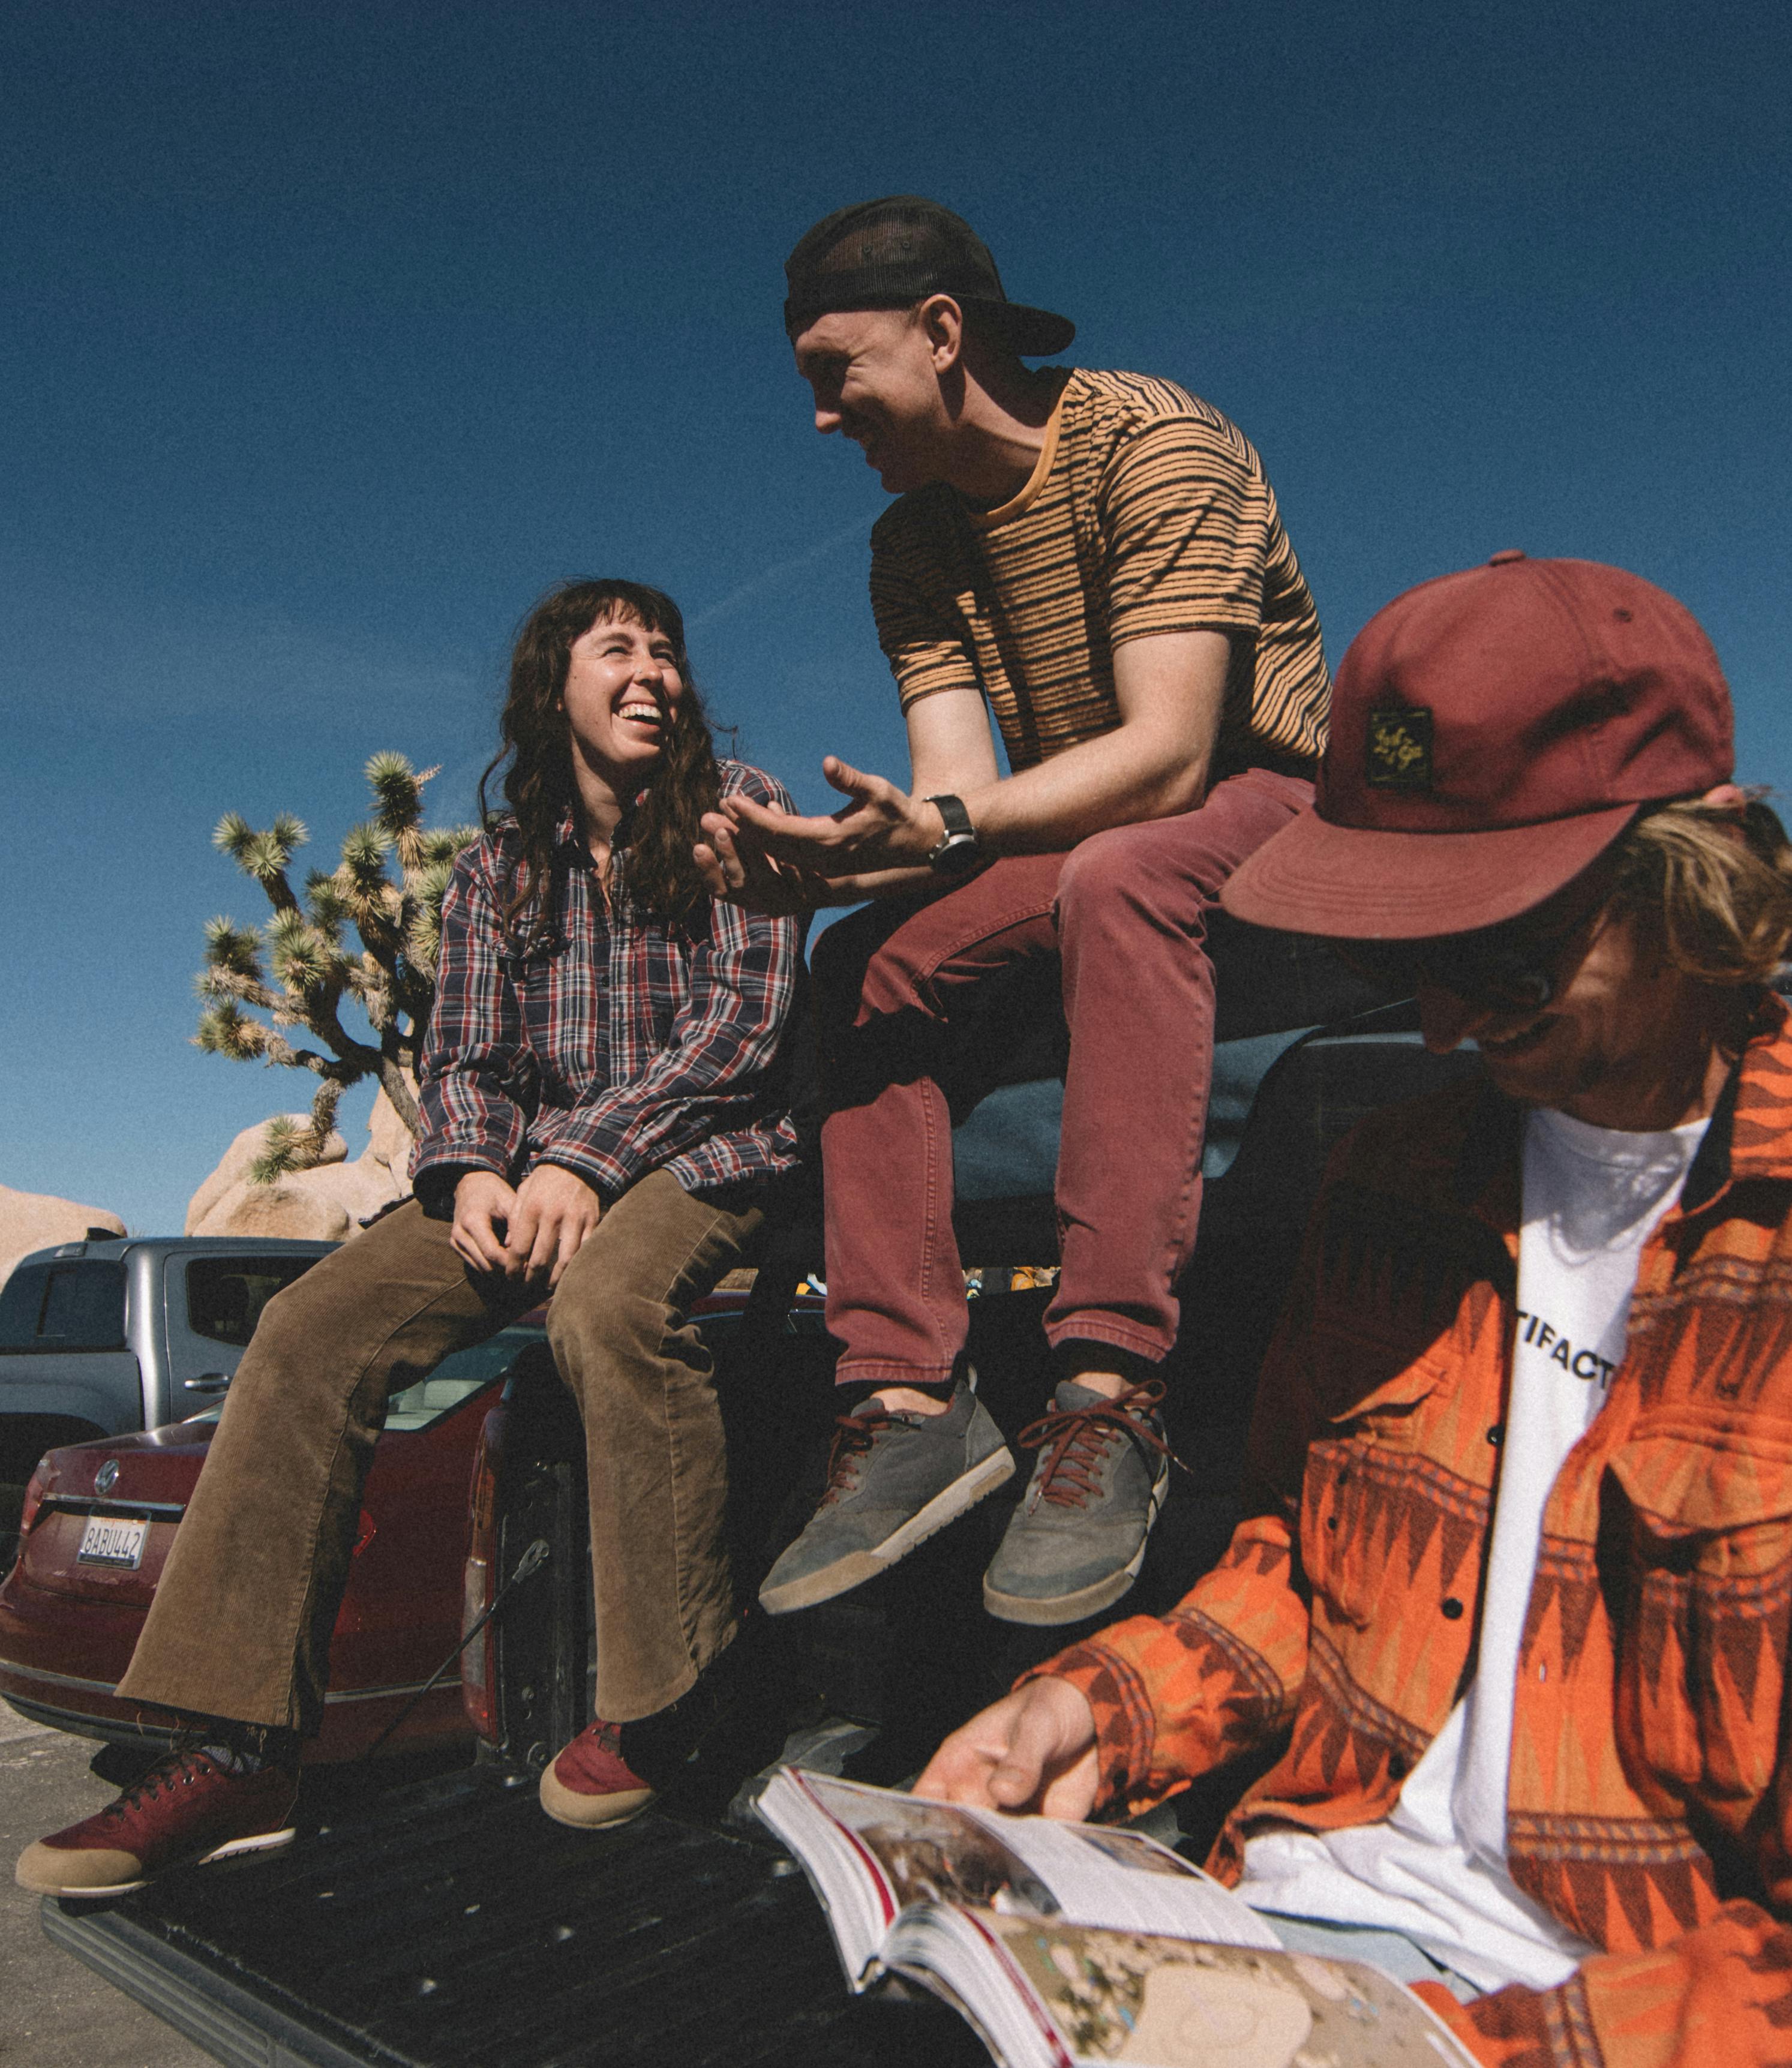 A group of creative climbers hangs out in a parking lot in Southern California.